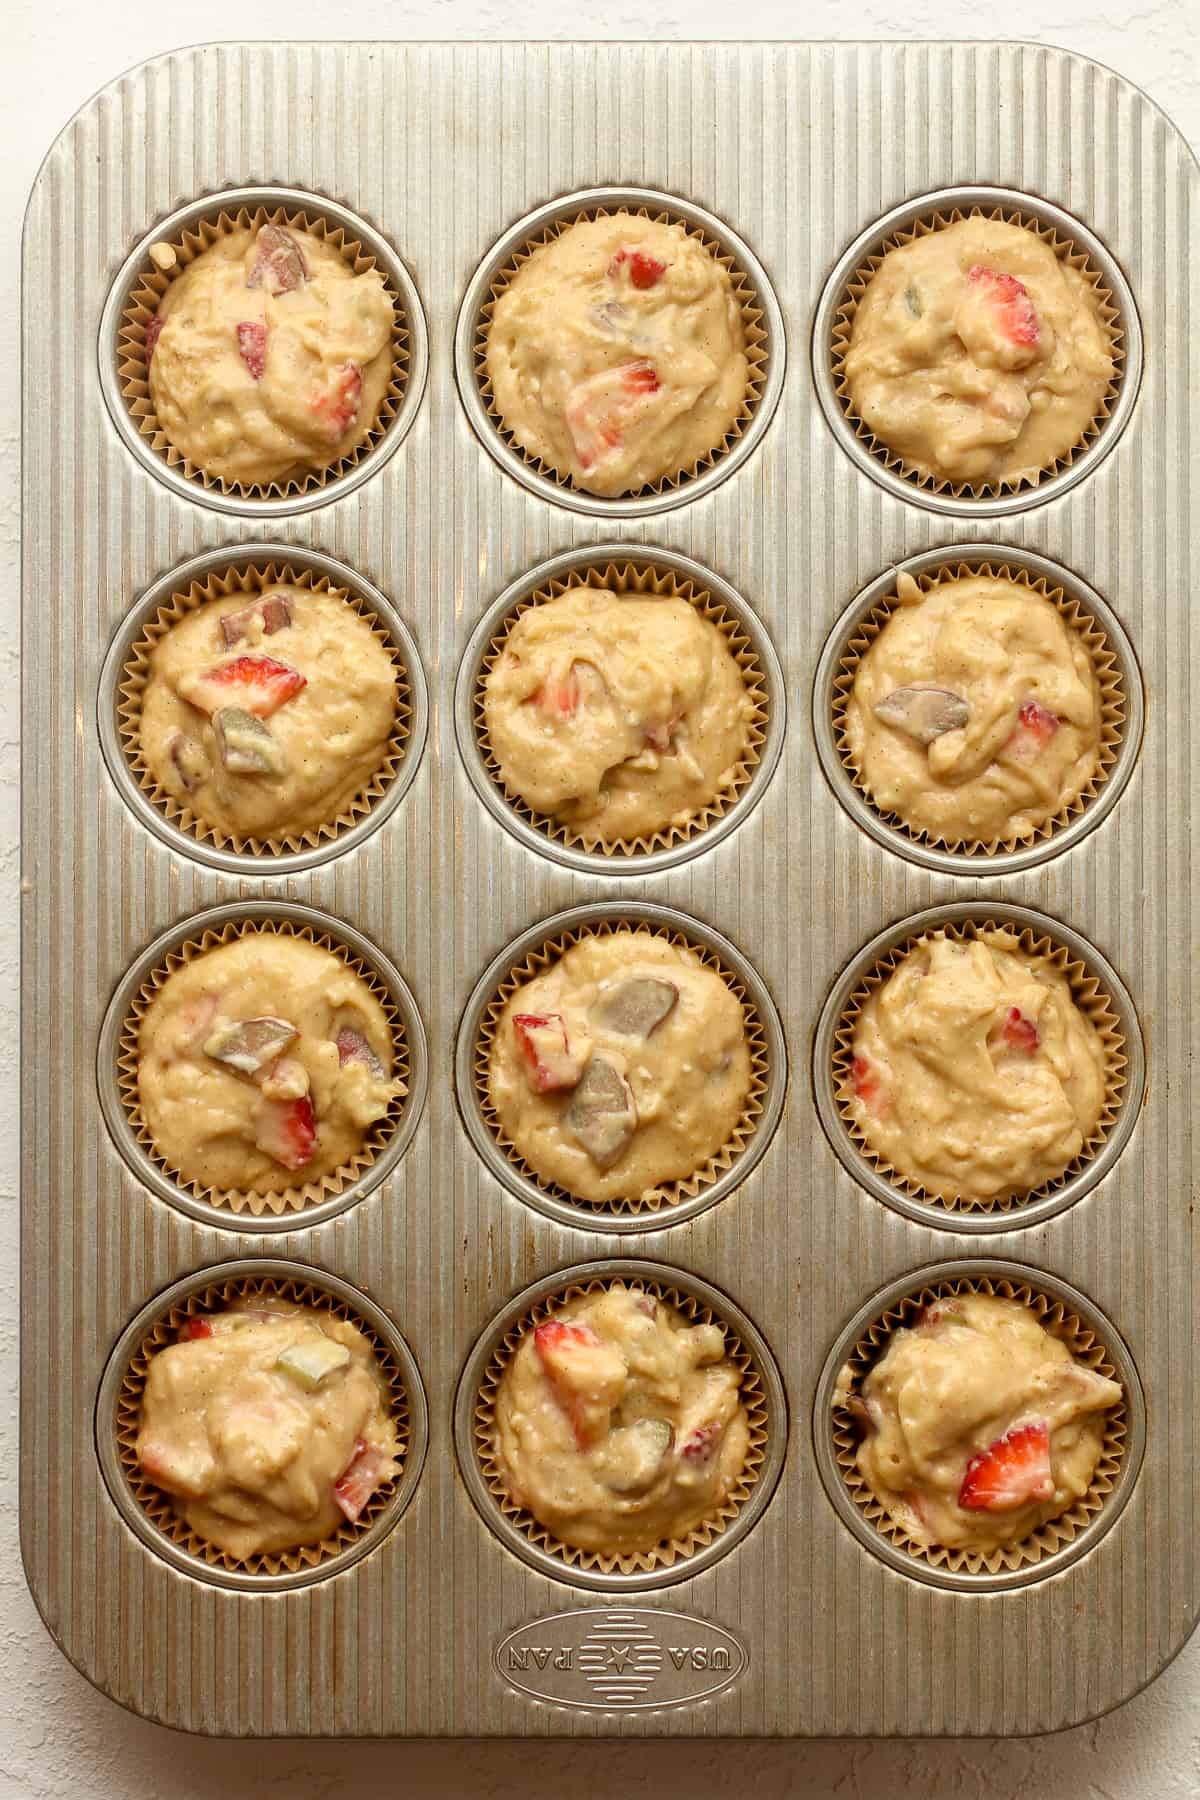 A 12 cup muffin pan with the batter.